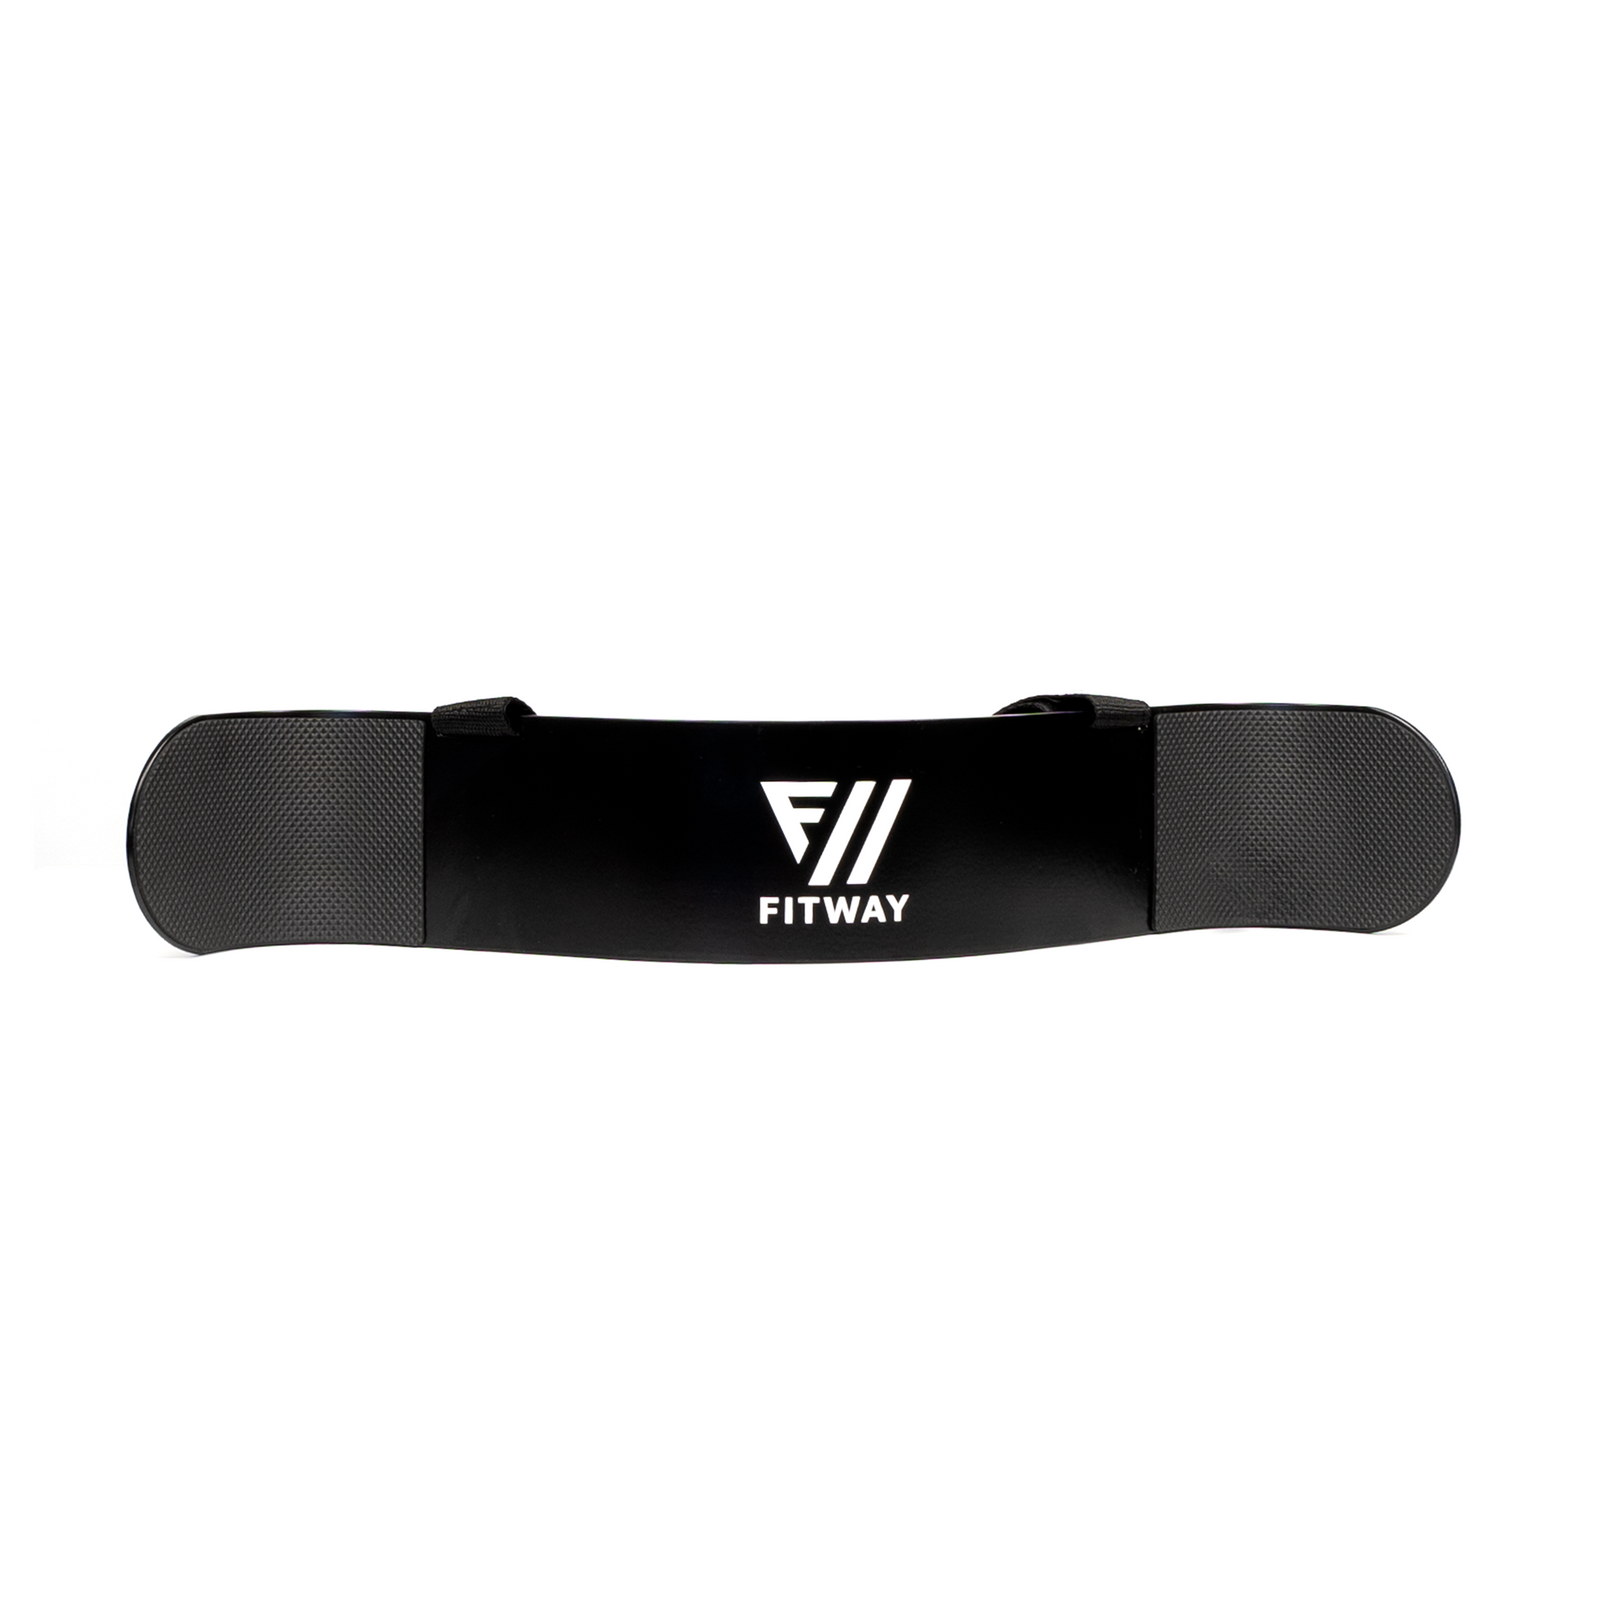 IRONBULL Advanced Squat Pad - Fitness Experience Commercial